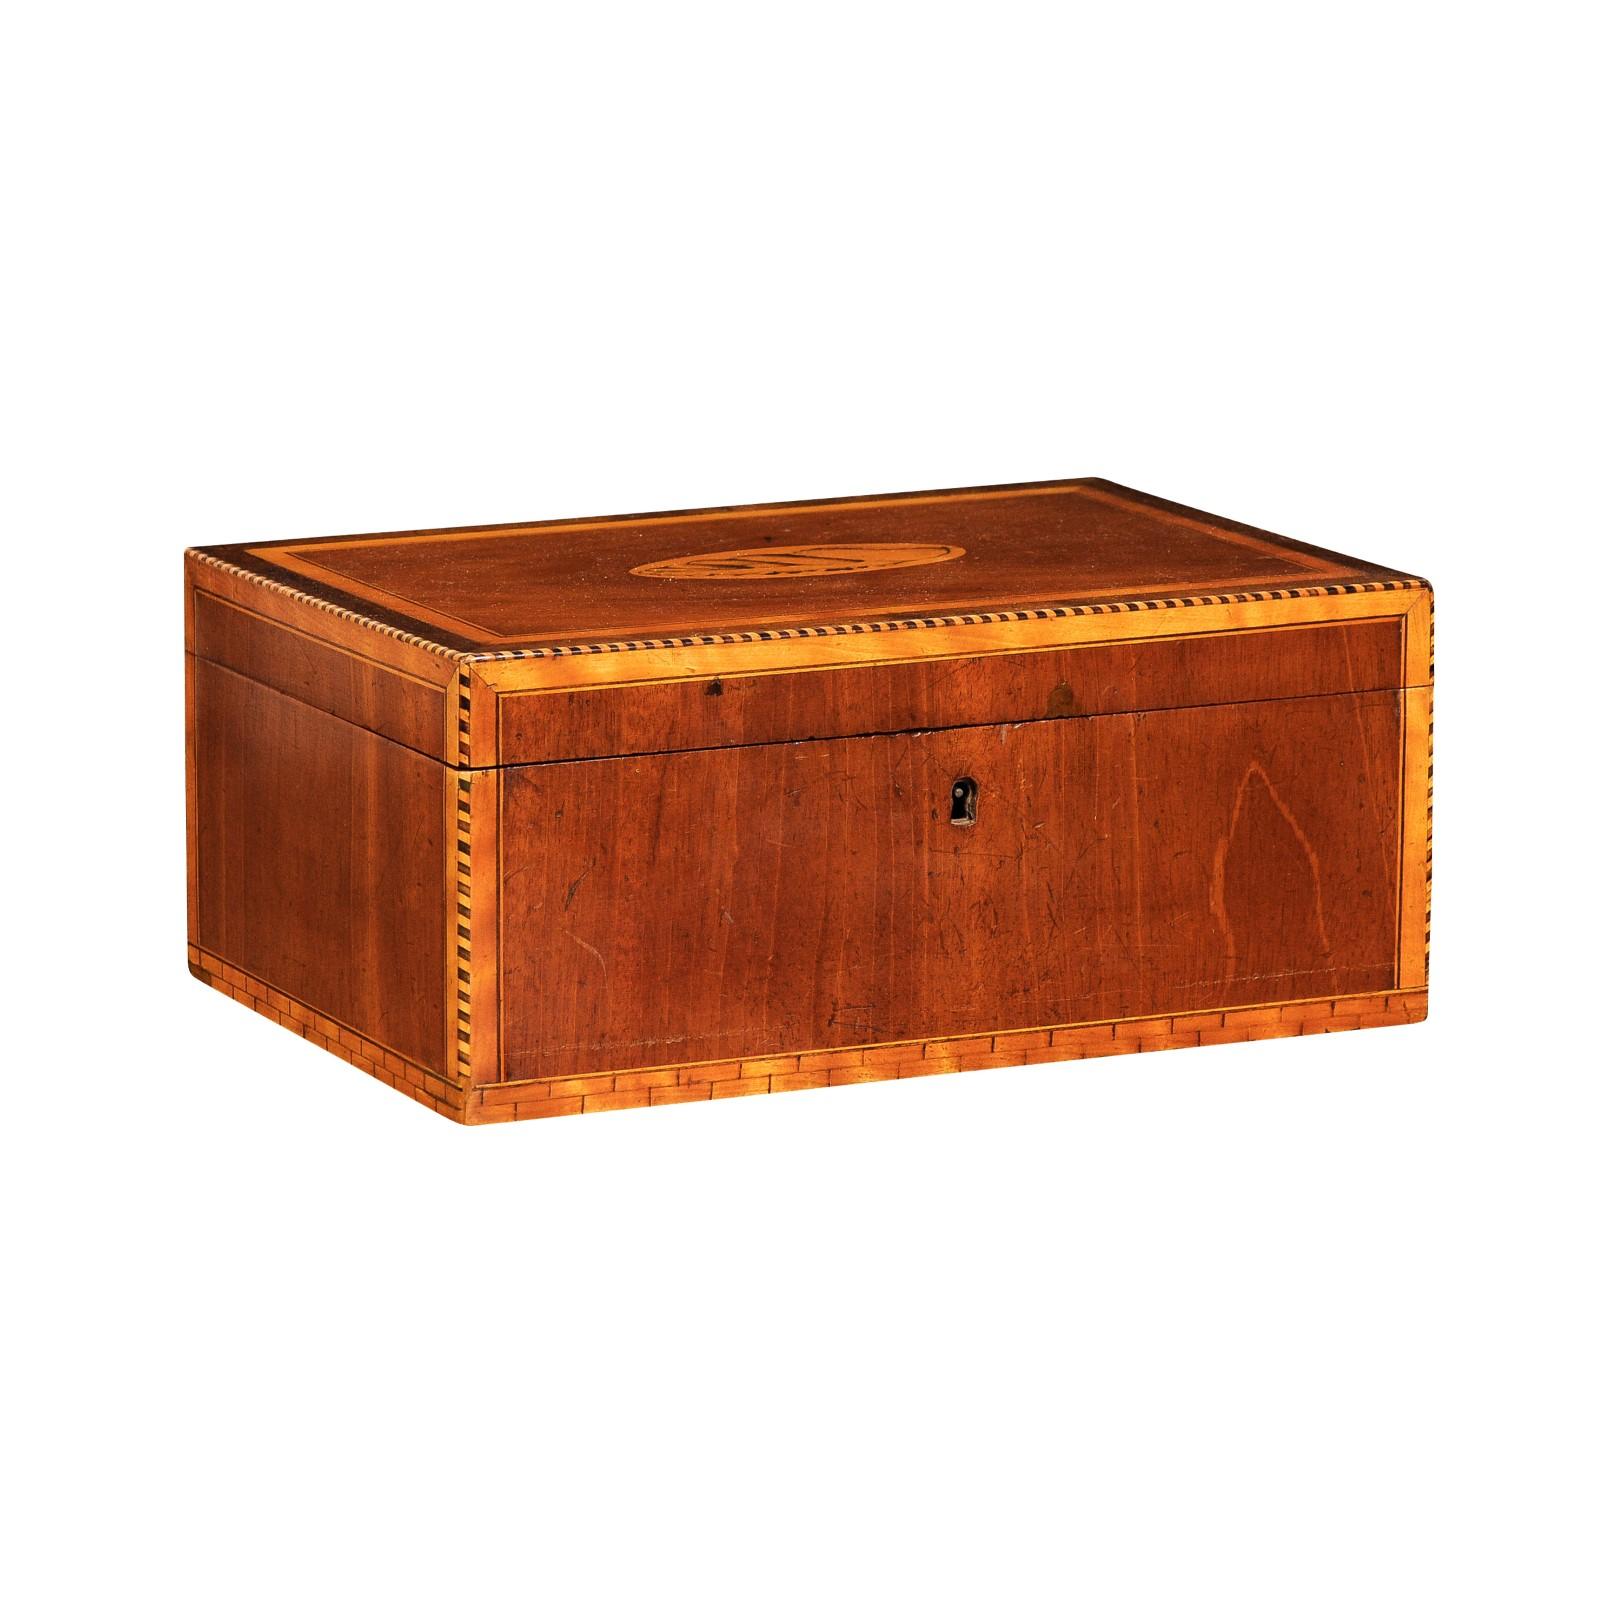 An English Victorian period ash or light walnut jewelry box from the 19th century with inlaid seashell motif. This English Victorian period jewelry box is a splendid exemplar of 19th-century craftsmanship, combining the subtle hues of ash or light